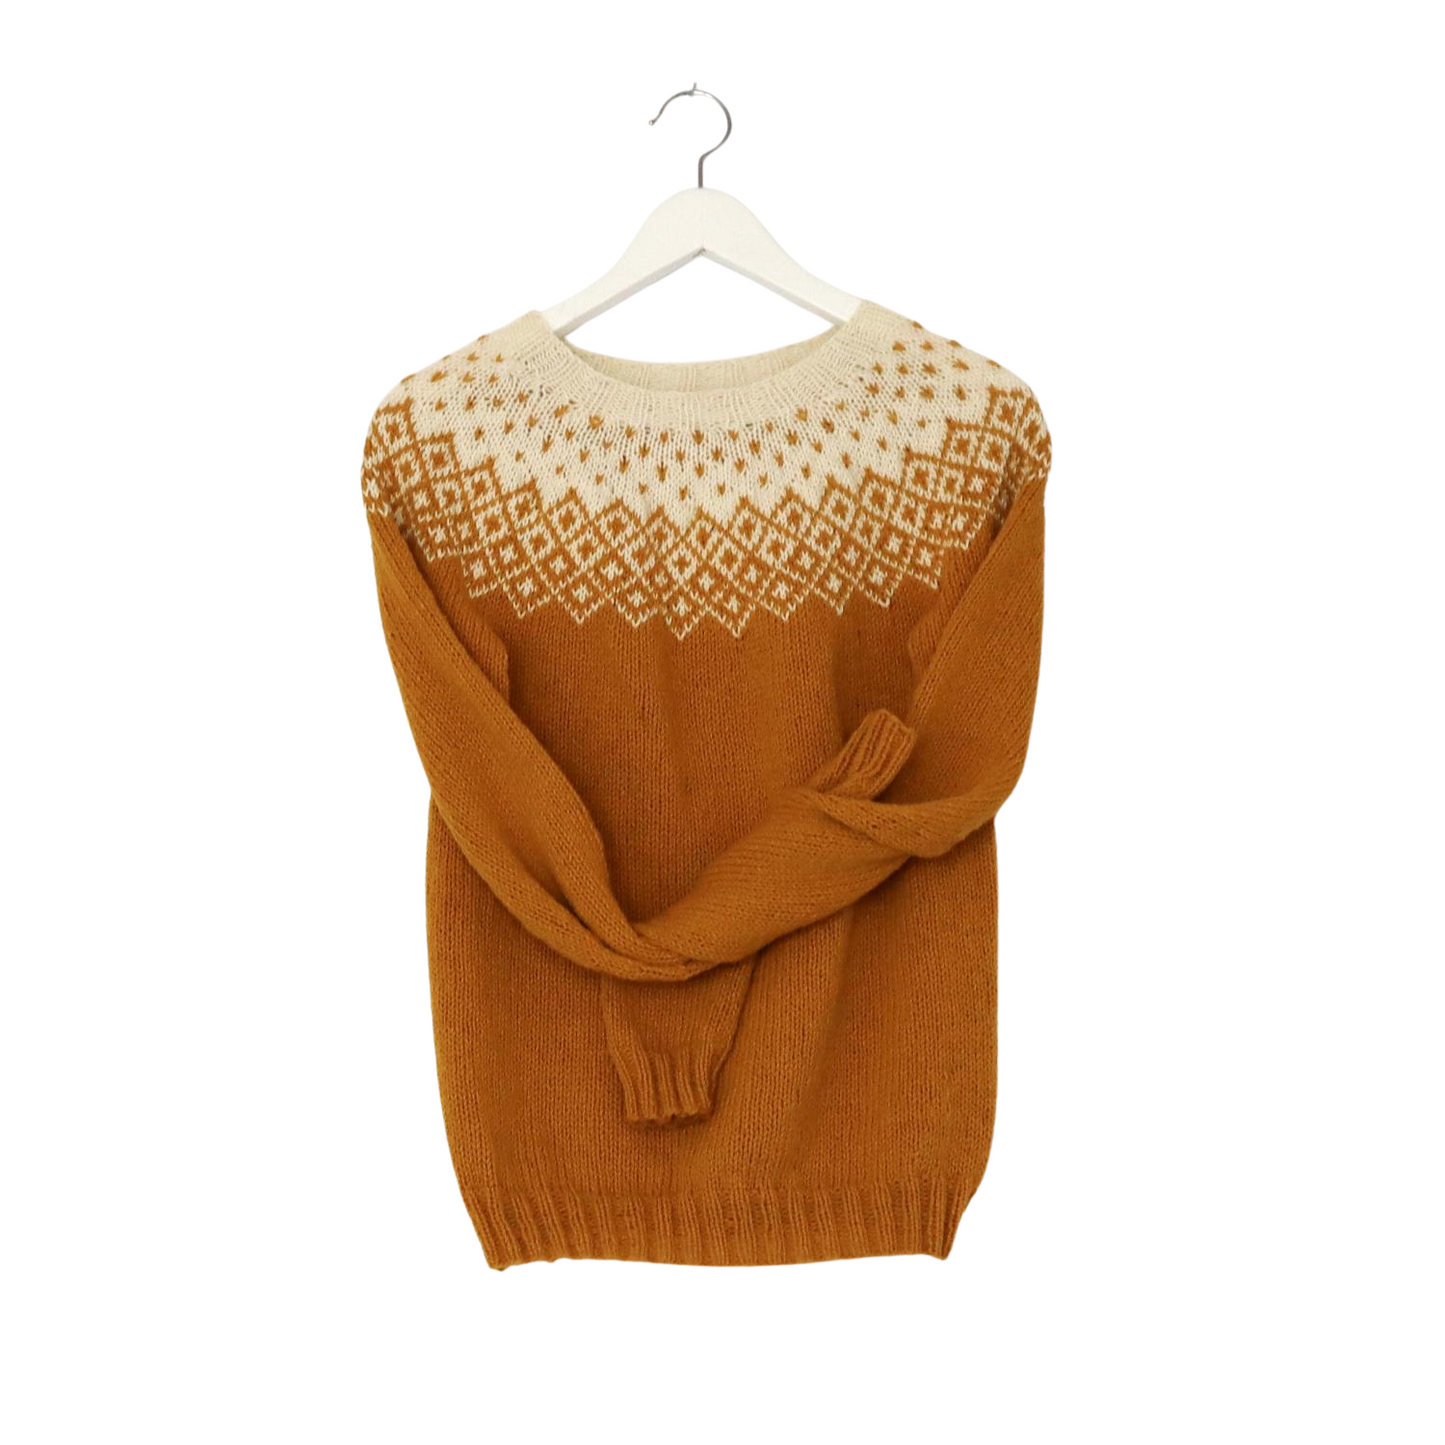 Stay Warm and Stylish with this Hand-Knitted Bohéme Wool Sweater for Women